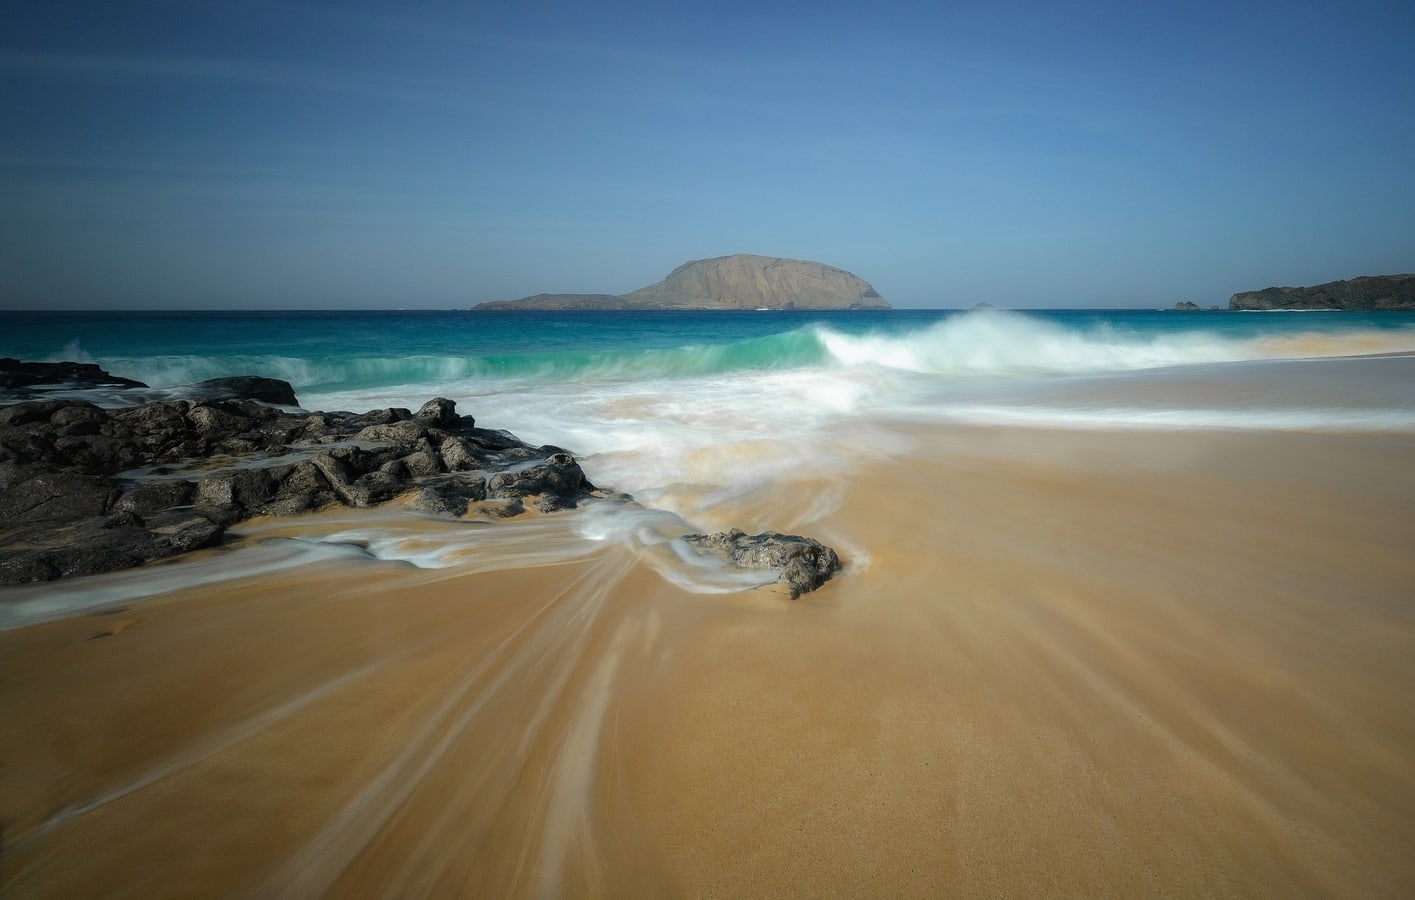 Long exposure photography in beach 